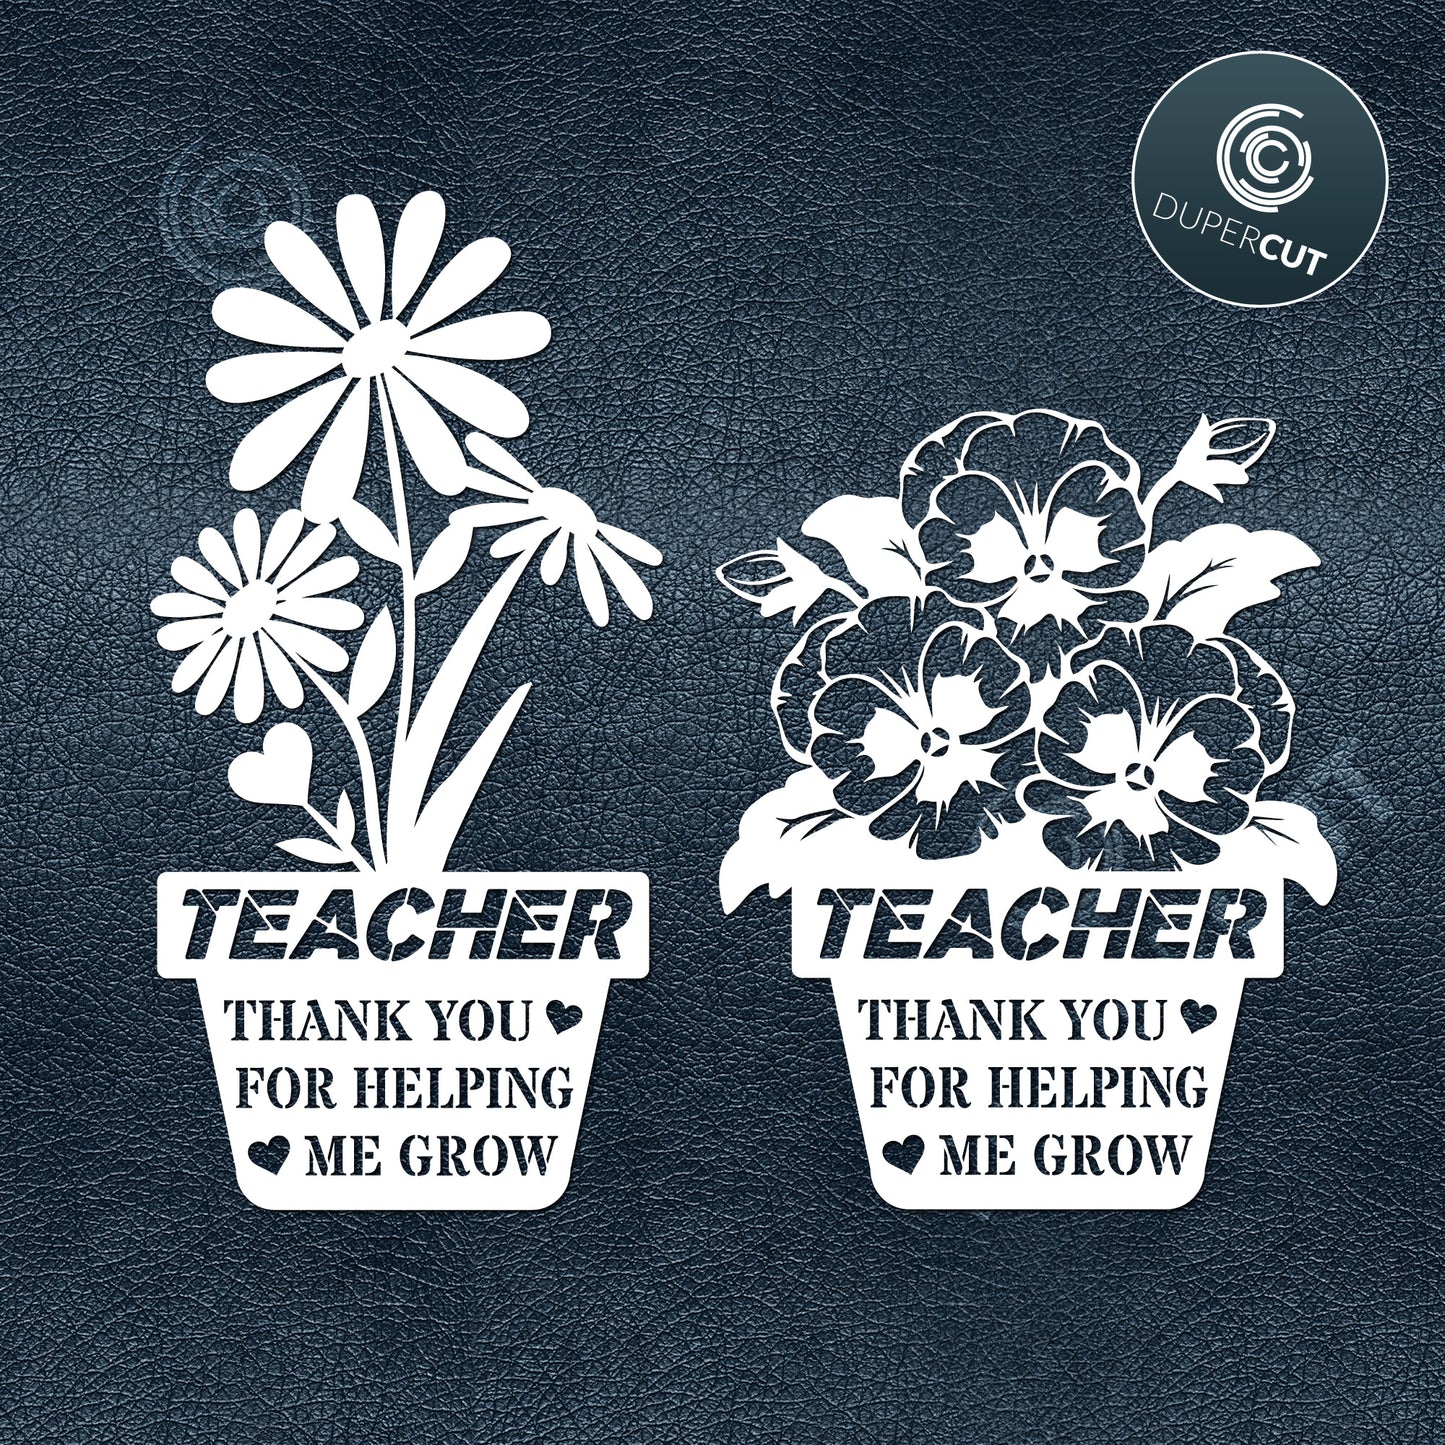 Thank you teacher for making me grow, gift for teacher, cutting  template - SVG DXF PNG files for Cricut, Glowforge, Silhouette Cameo, CNC Machines